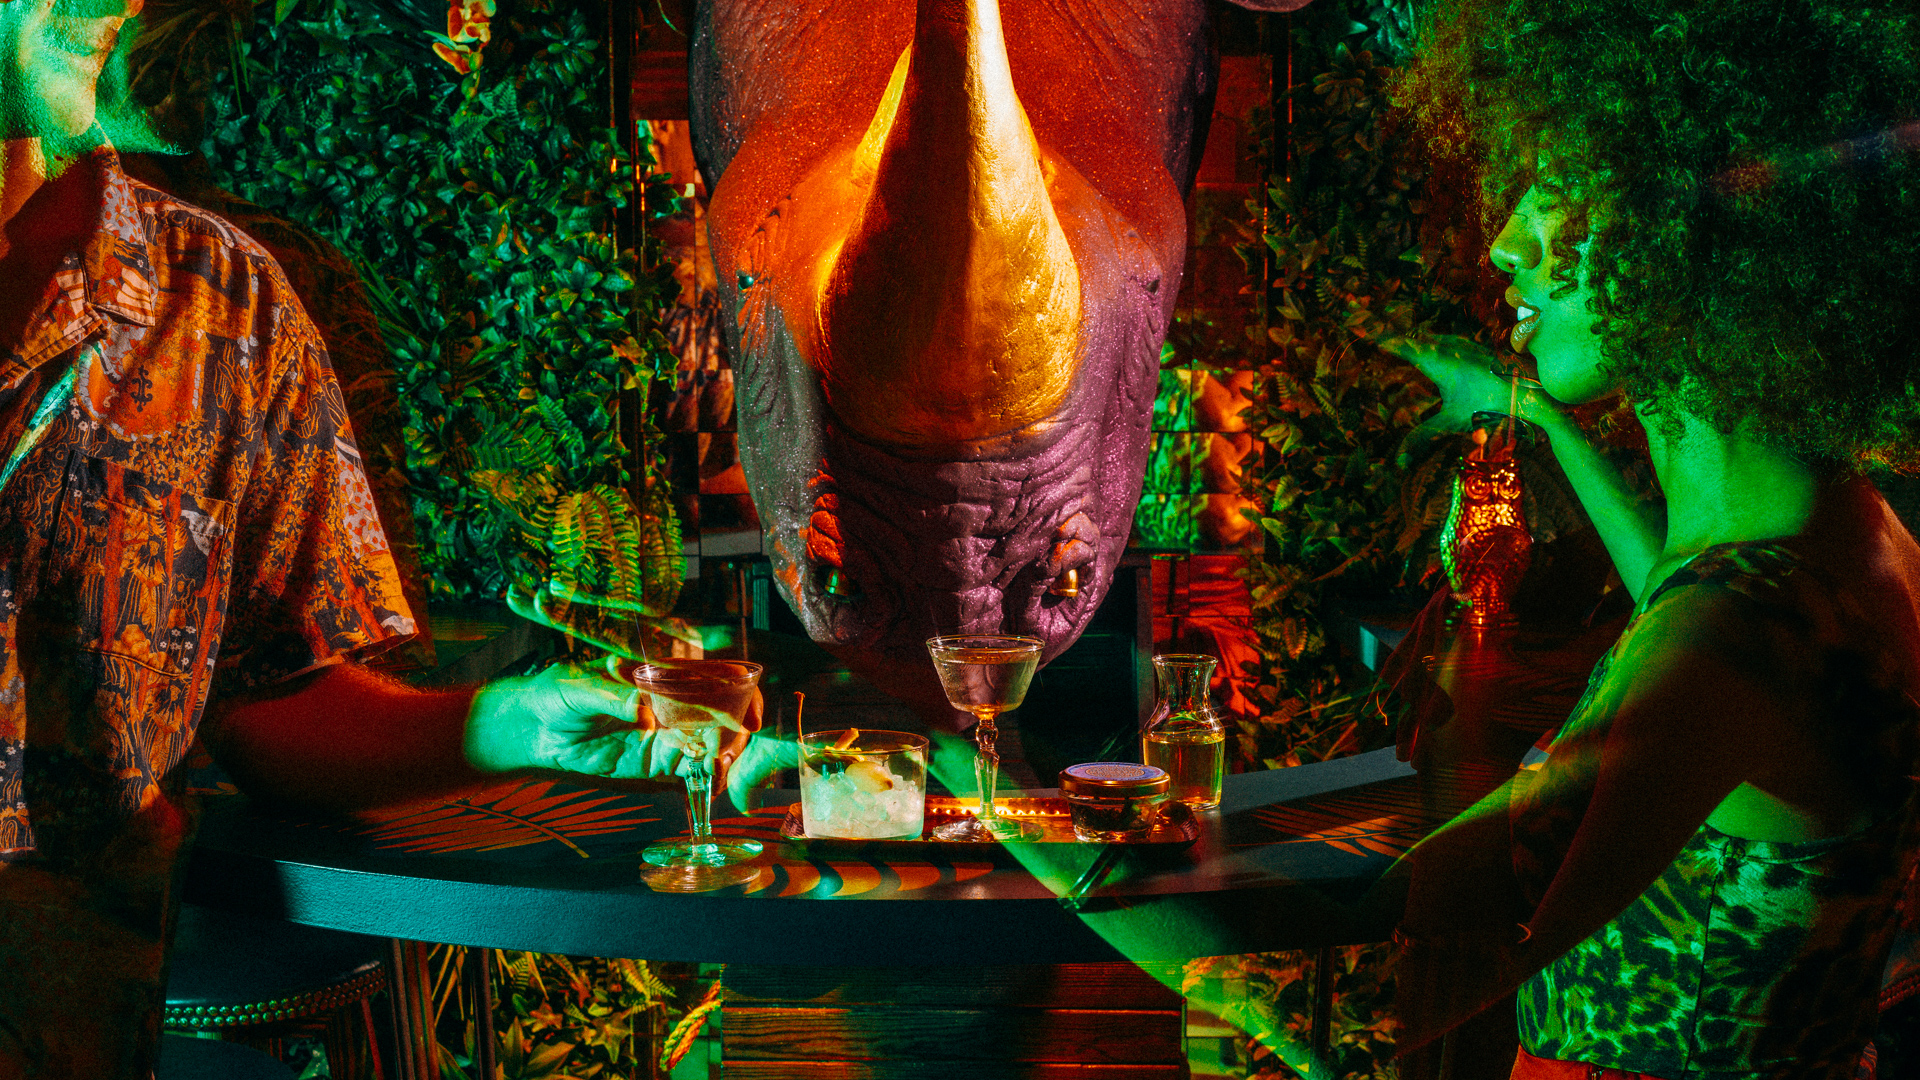 Close-up of a bar with people sitting at it with drinks and there's a 3D purple rhinoceros face behind the bar.